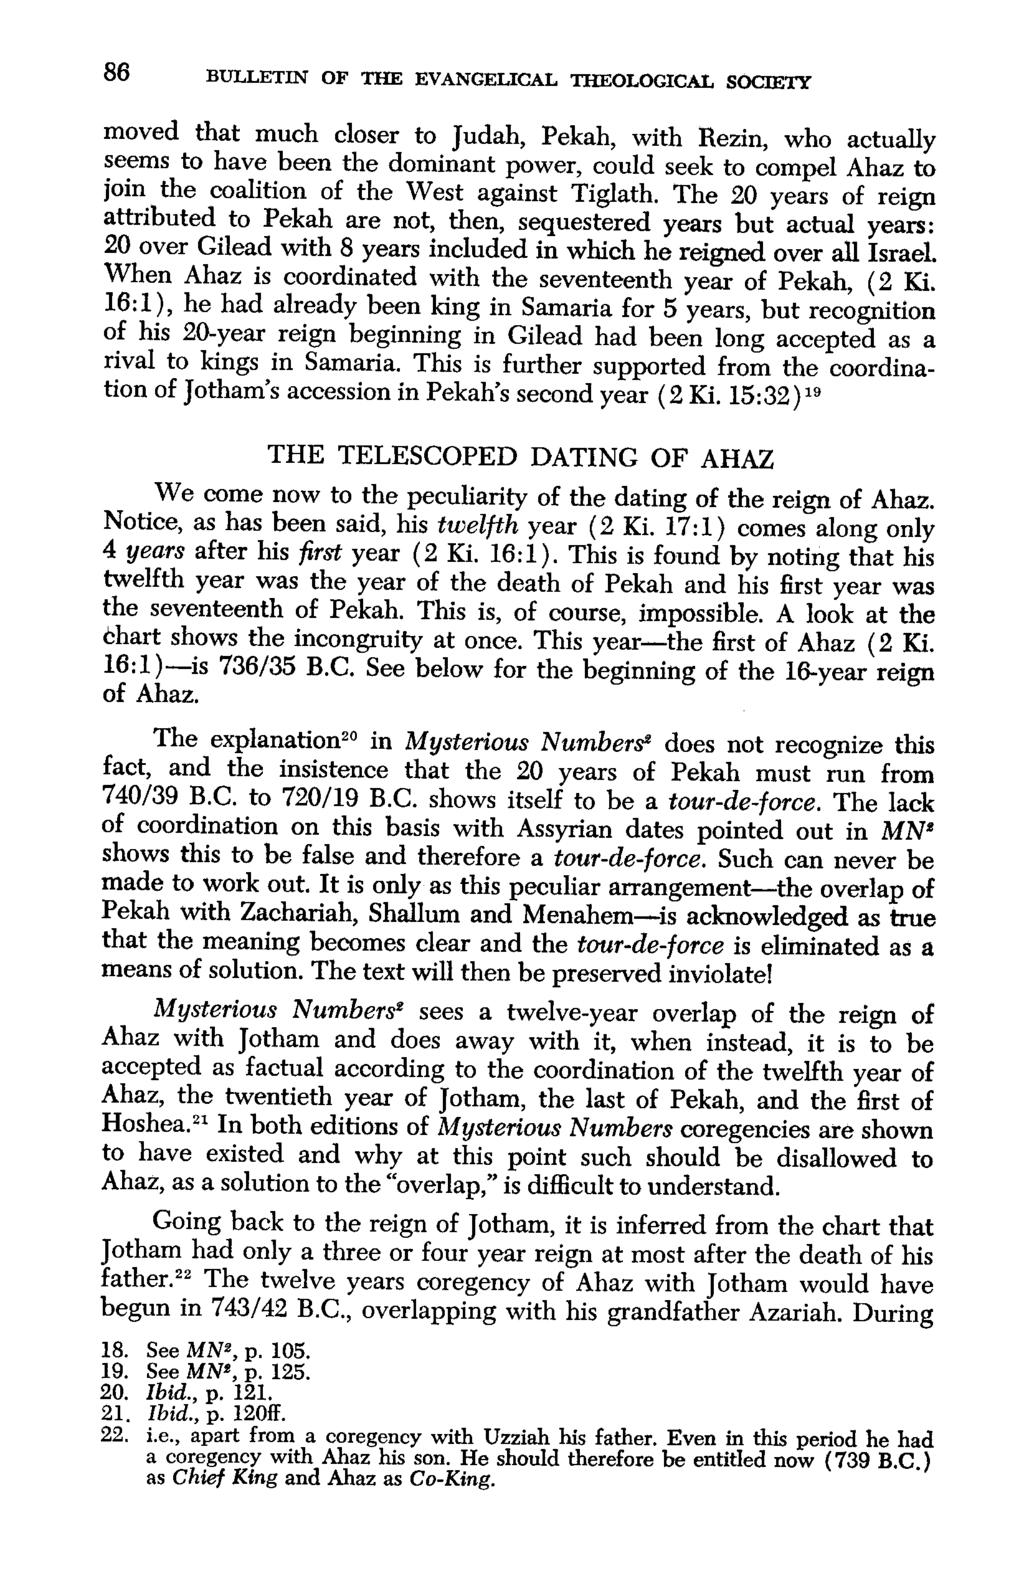 86 BULLETIN OF THE EVANGELICAL THEOLOGICAL SOCIETY moved that much closer to Judah, Pekah, with Rezin, who actually seems to have been the dominant power, could seek to compel Ahaz to join the